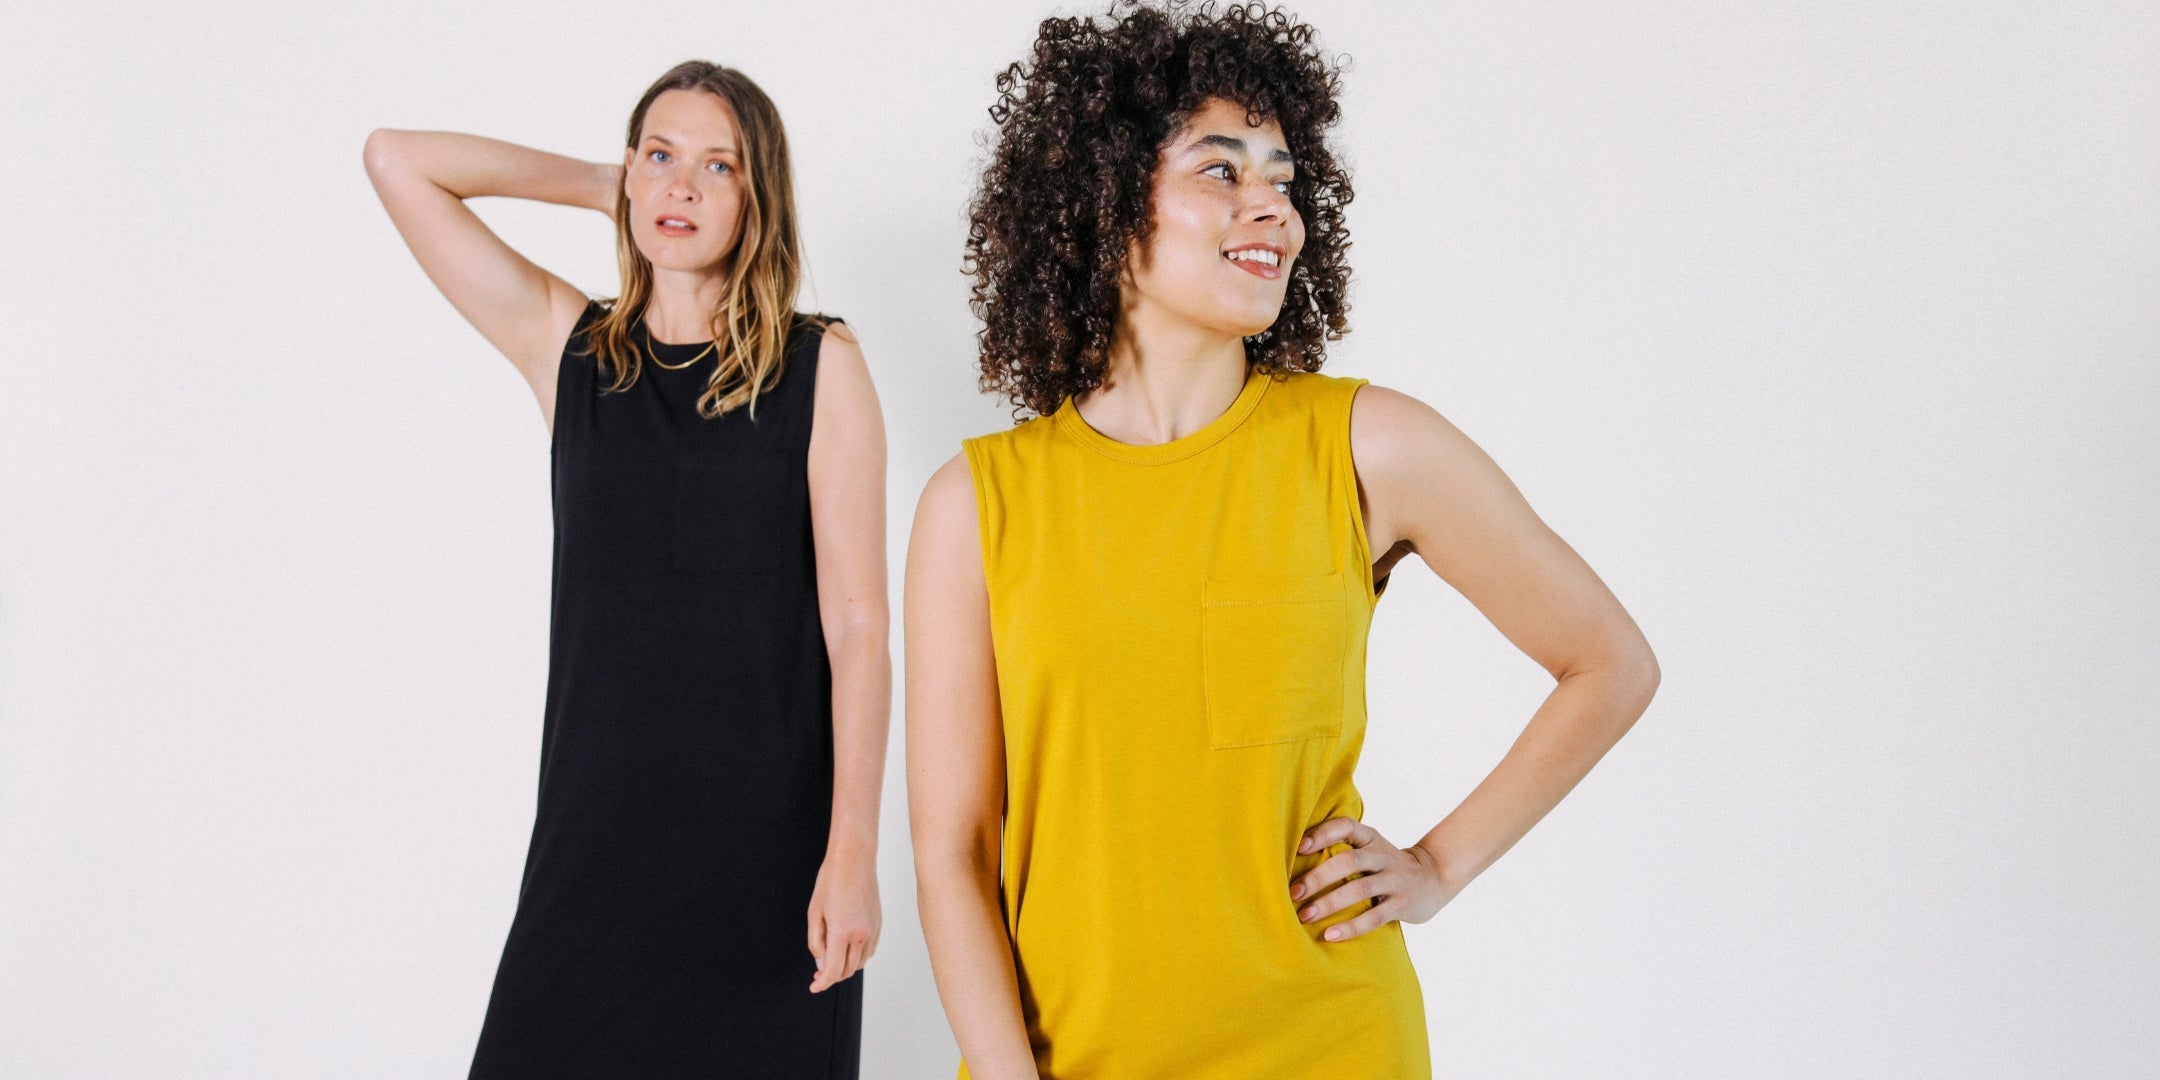 Sustainable Spring Clothing for Women sizes XS-3X made ethically in America